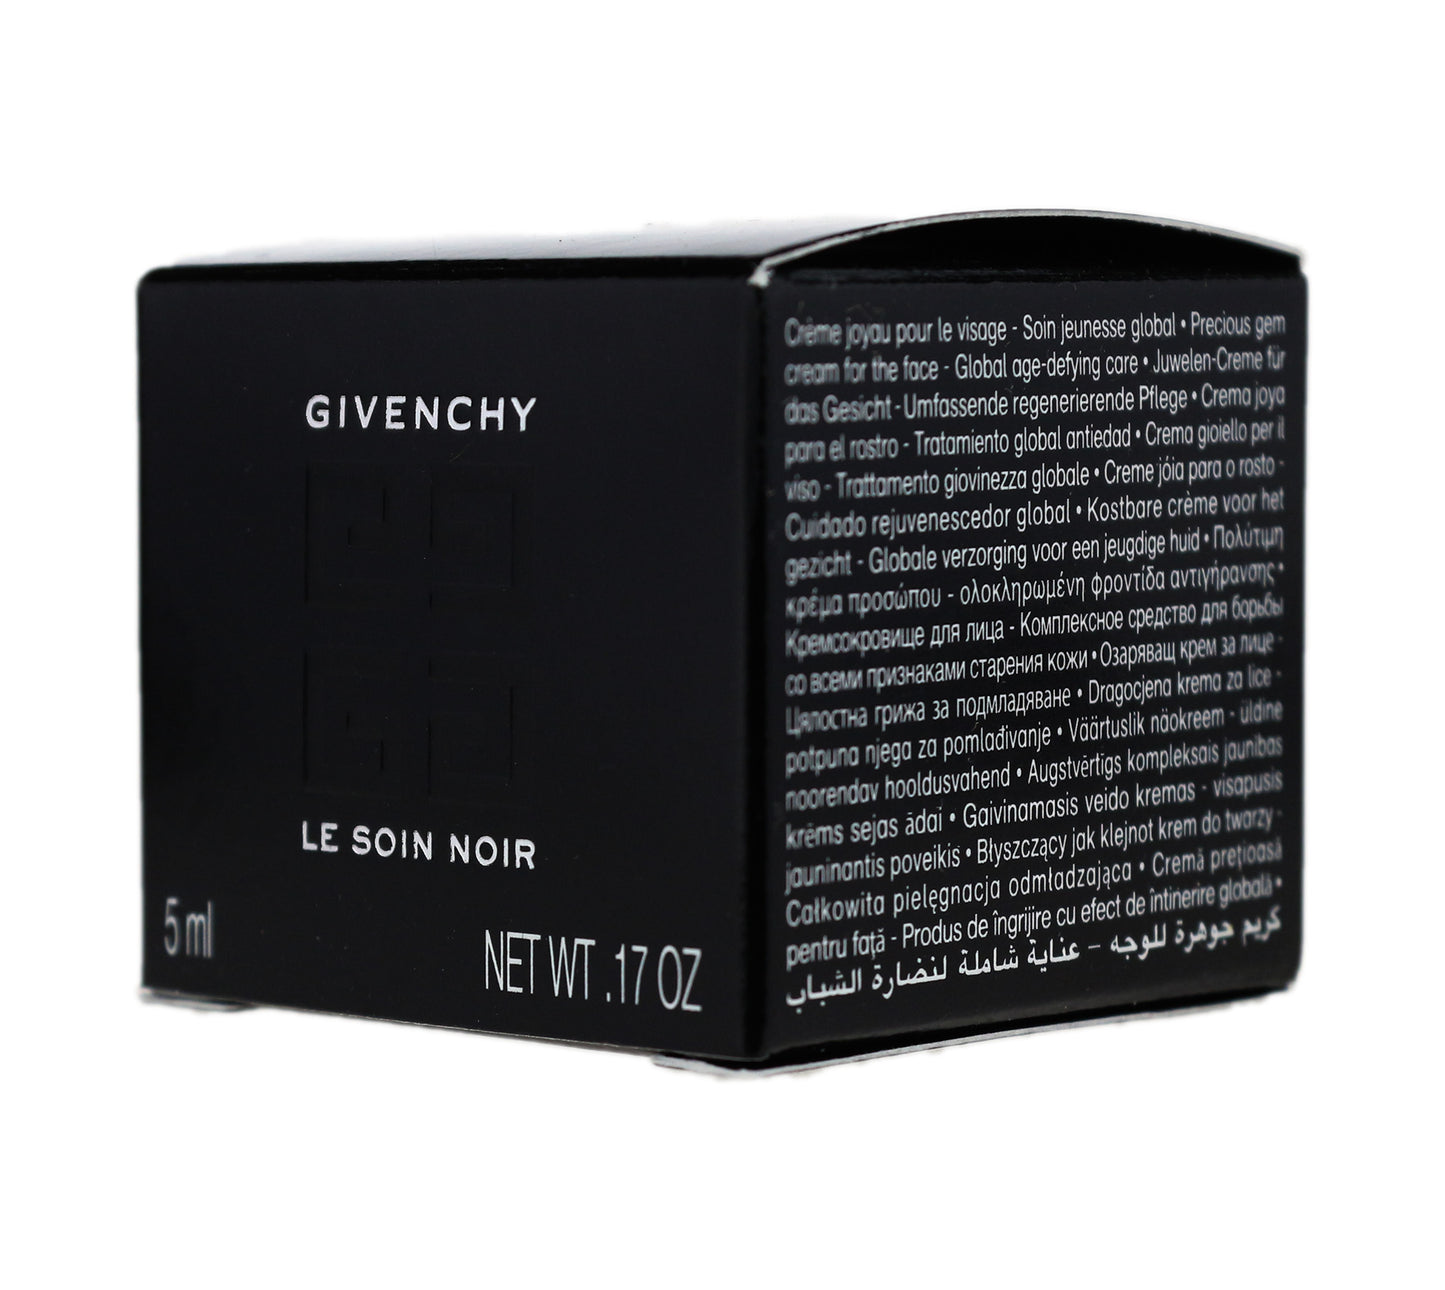 Givenchy Exceptional Beauty-Renewal Skincare 0.17Oz/5ml New In Box [Pack Of 2]